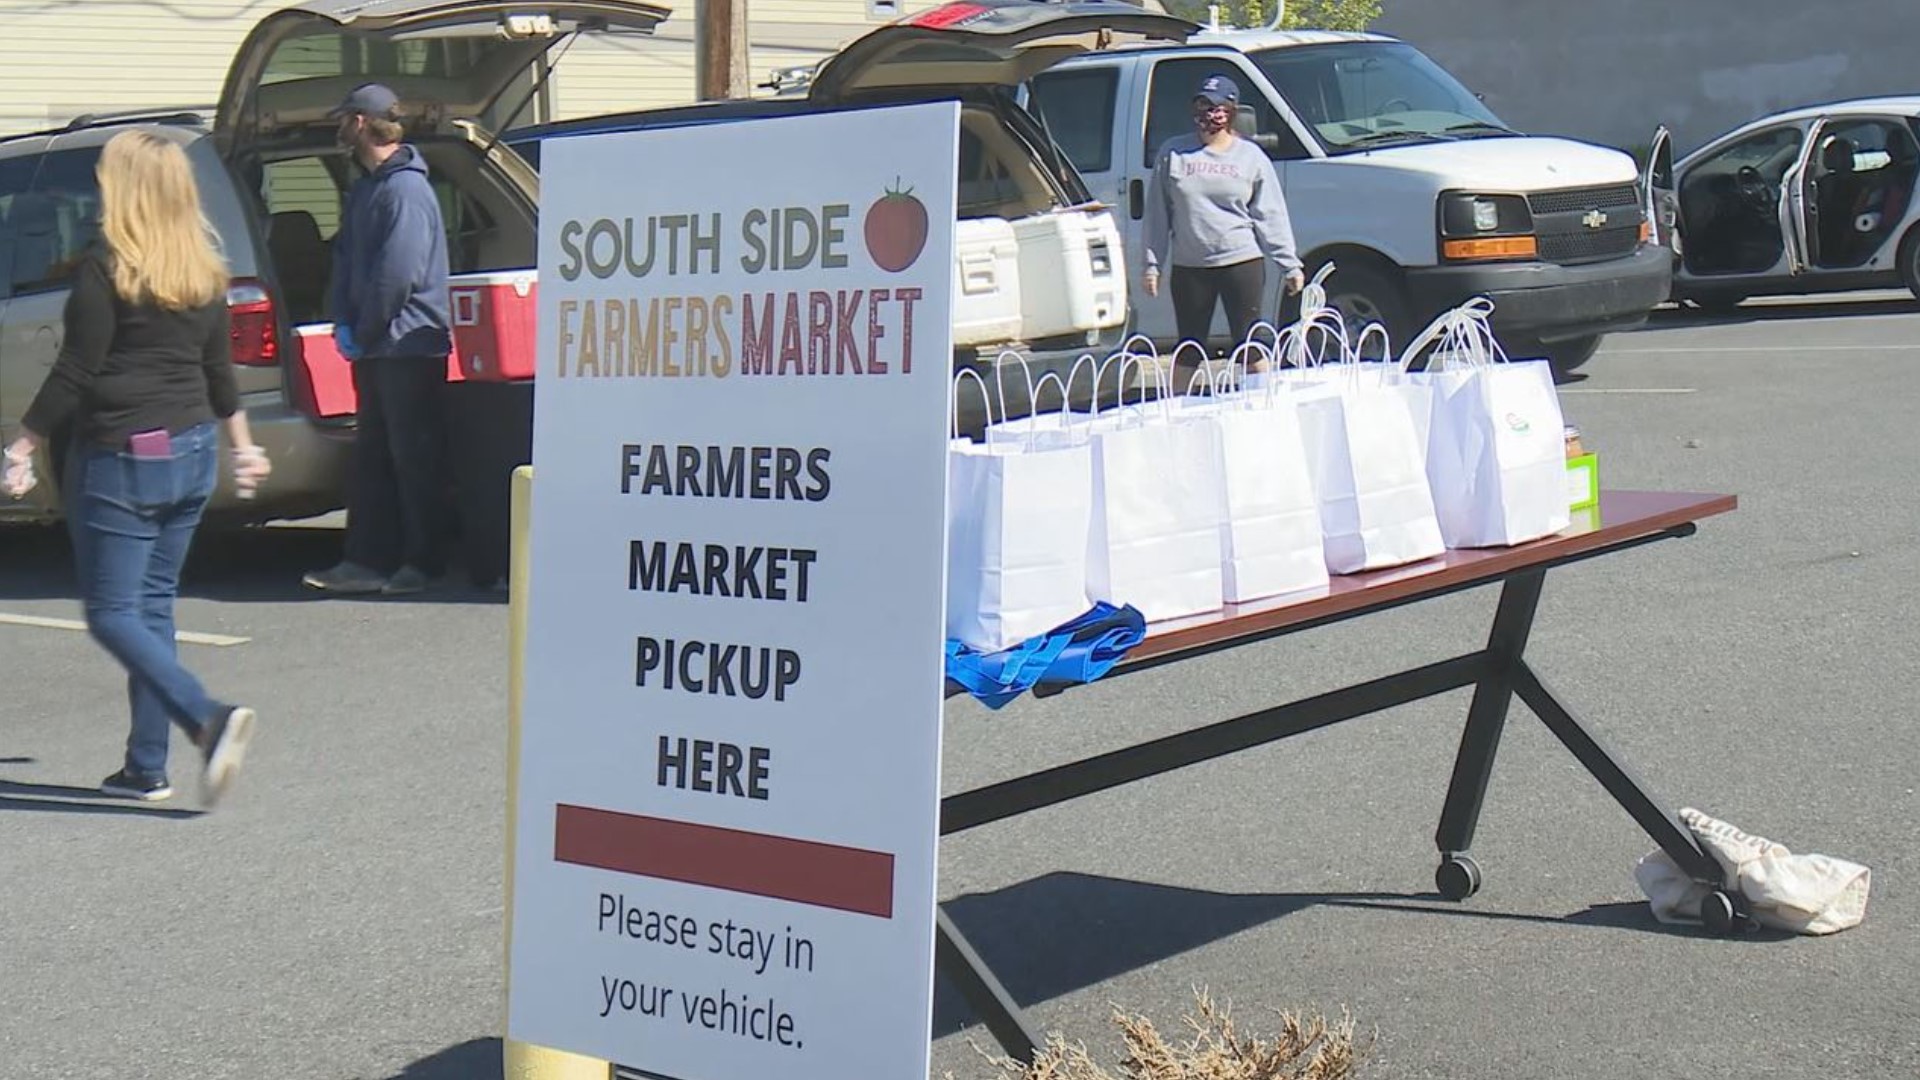 Farmers are expecting a bumper crop of customers this season, hoping for another busy year at the farmers markets in Scranton.